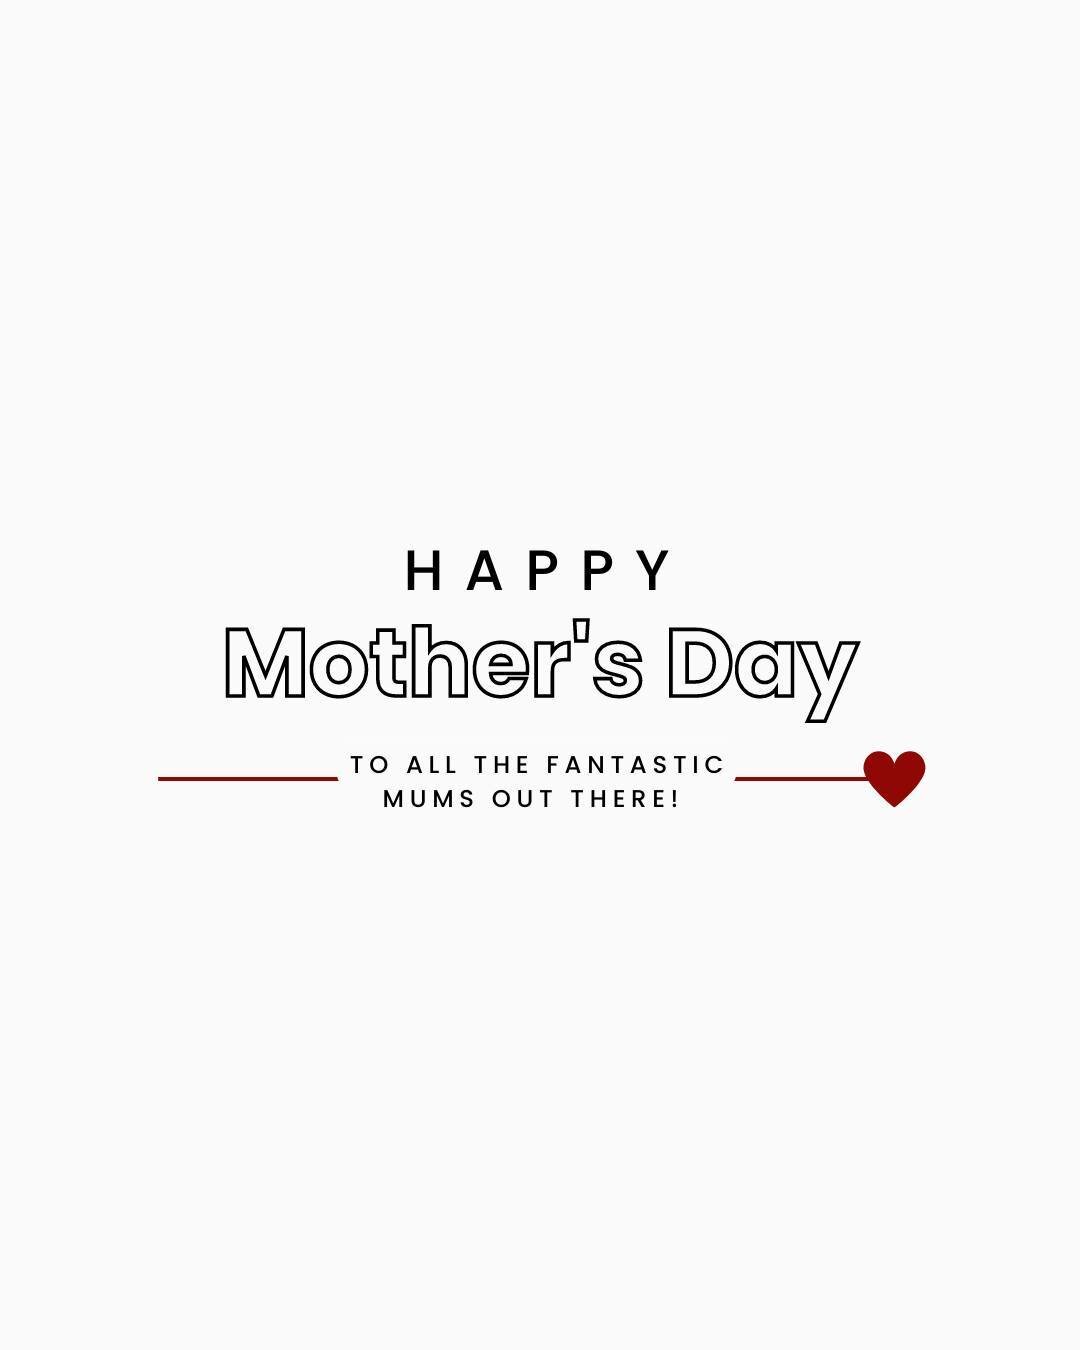 Happy Mother's Day to all the fantastic Mums and Mum figures out there! 💐 

#newcastlelife #newcastleaus #newcastlenswaustralia #lakemacquariebusiness #lakemac #lakemacquariensw #customhome #customhomebuilder #homebuilders #luxuryhomebuilder #custom